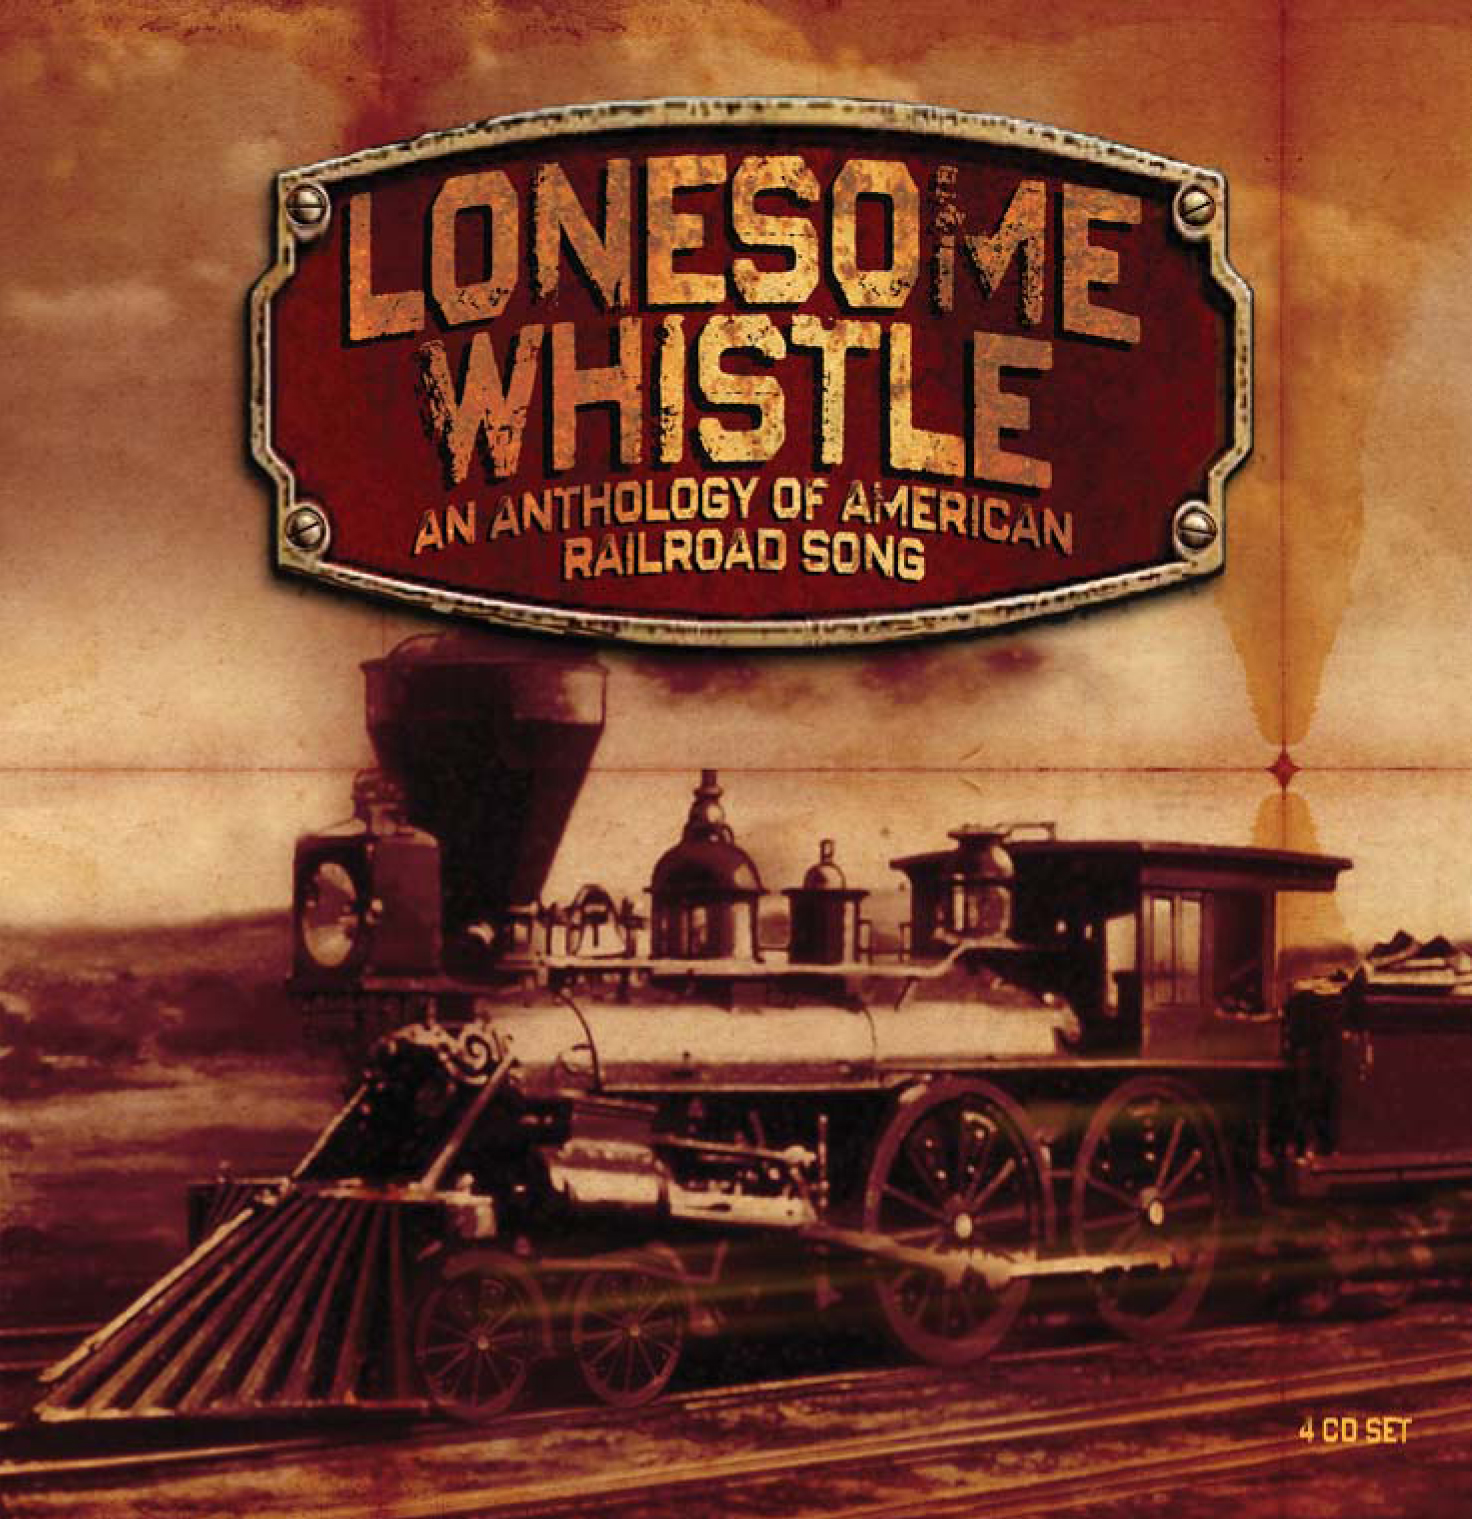 LONESOME WHISTLE: ANTHOLOGY OF AMERICAN RAILROAD